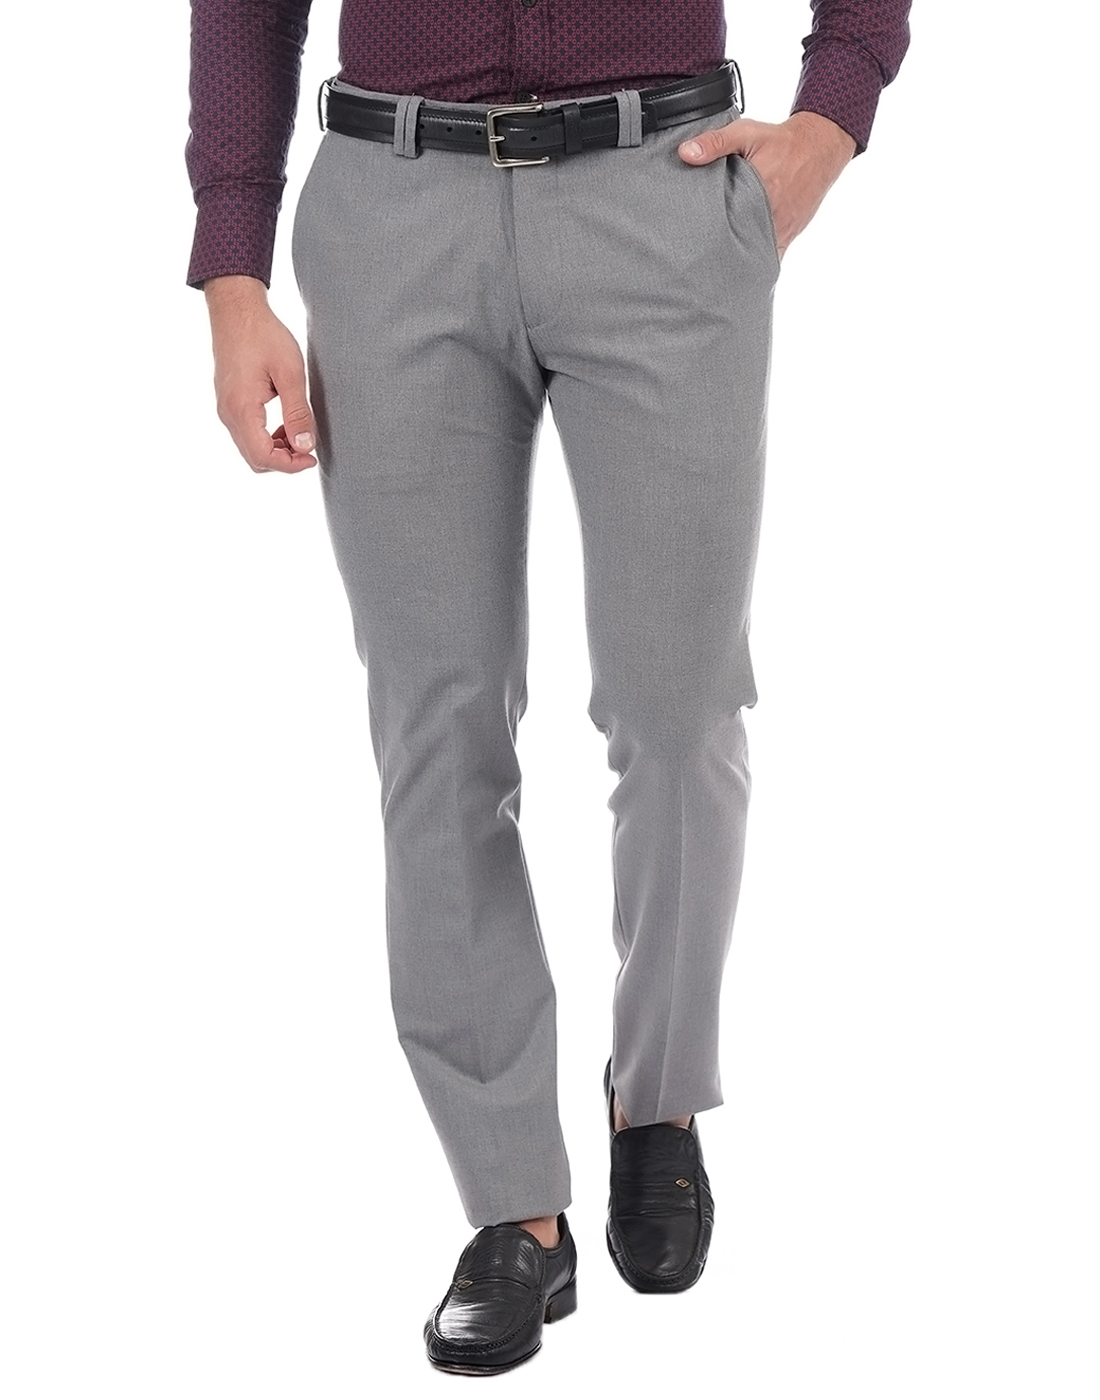 US Polo Assn Men Casual Wear Solid Trouser  KNOCKOUT  Grey  91283